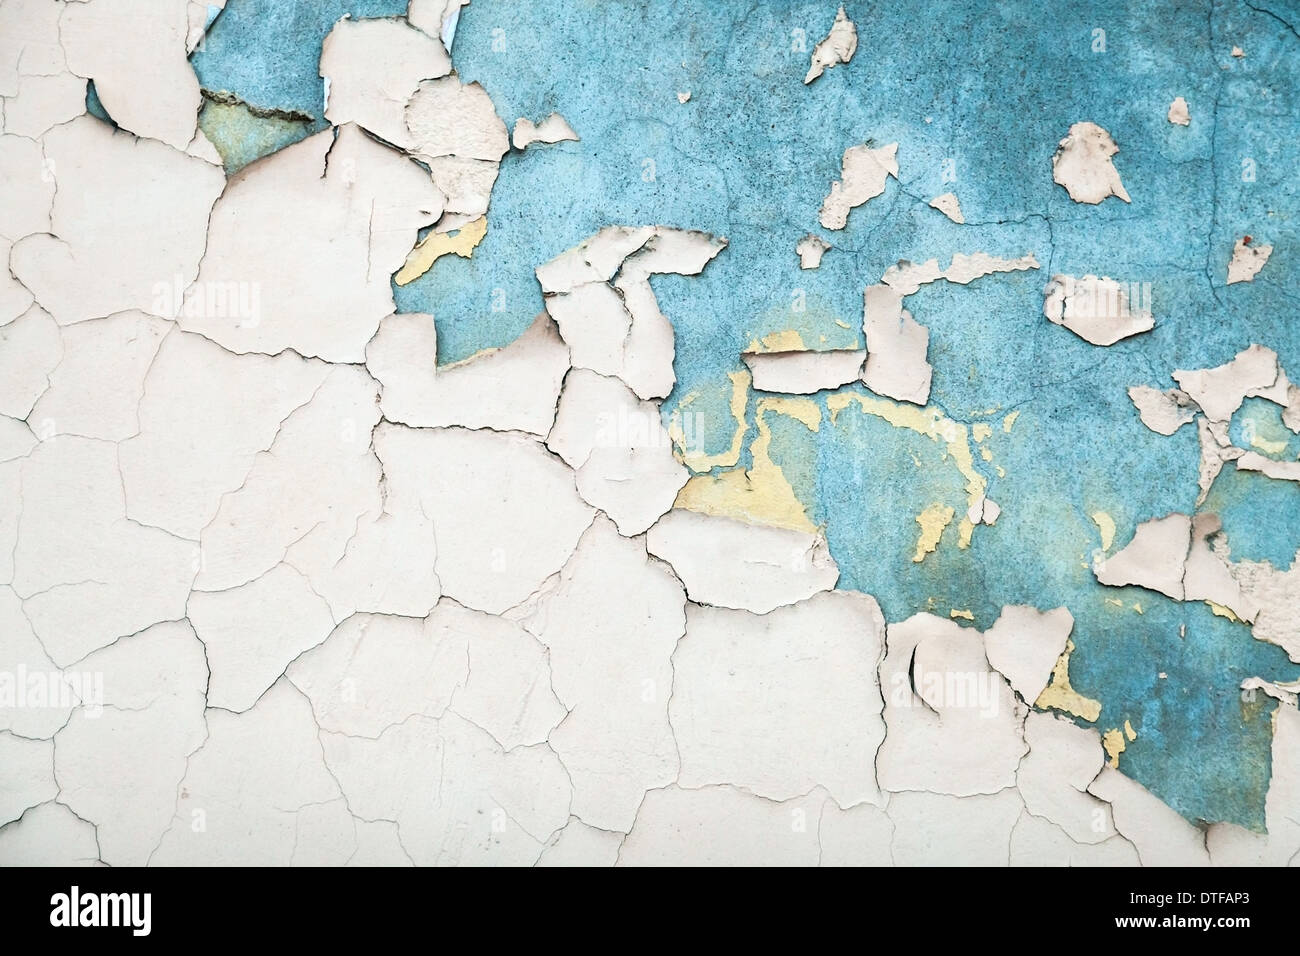 Texture of old white cracked paint on blue concrete wall Stock Photo